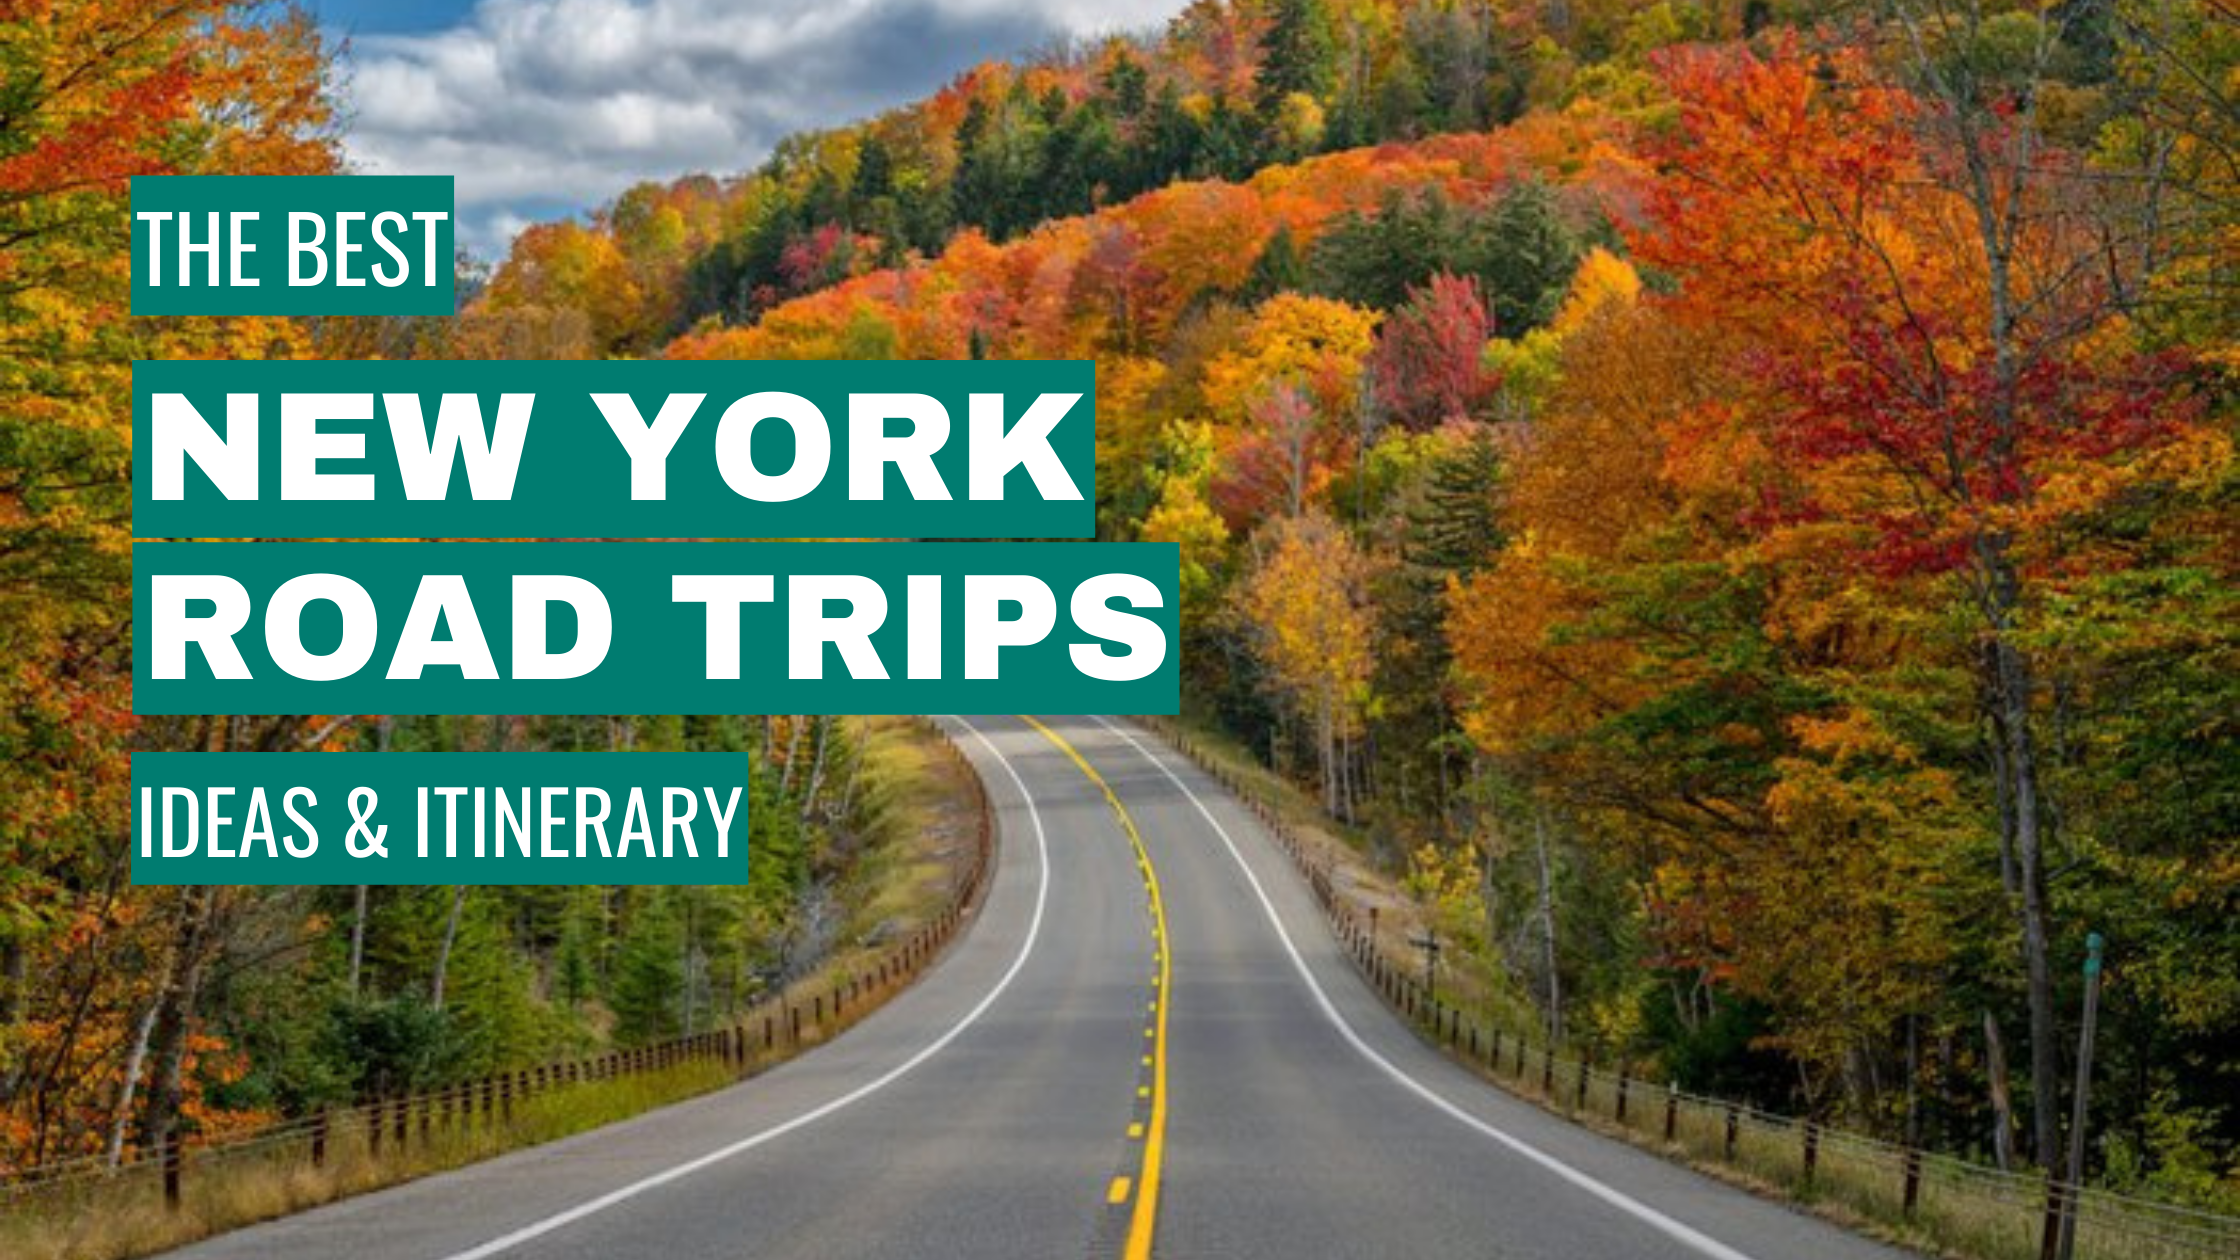 New York Road Trip Ideas: 11 Best Road Trips + Itinerary